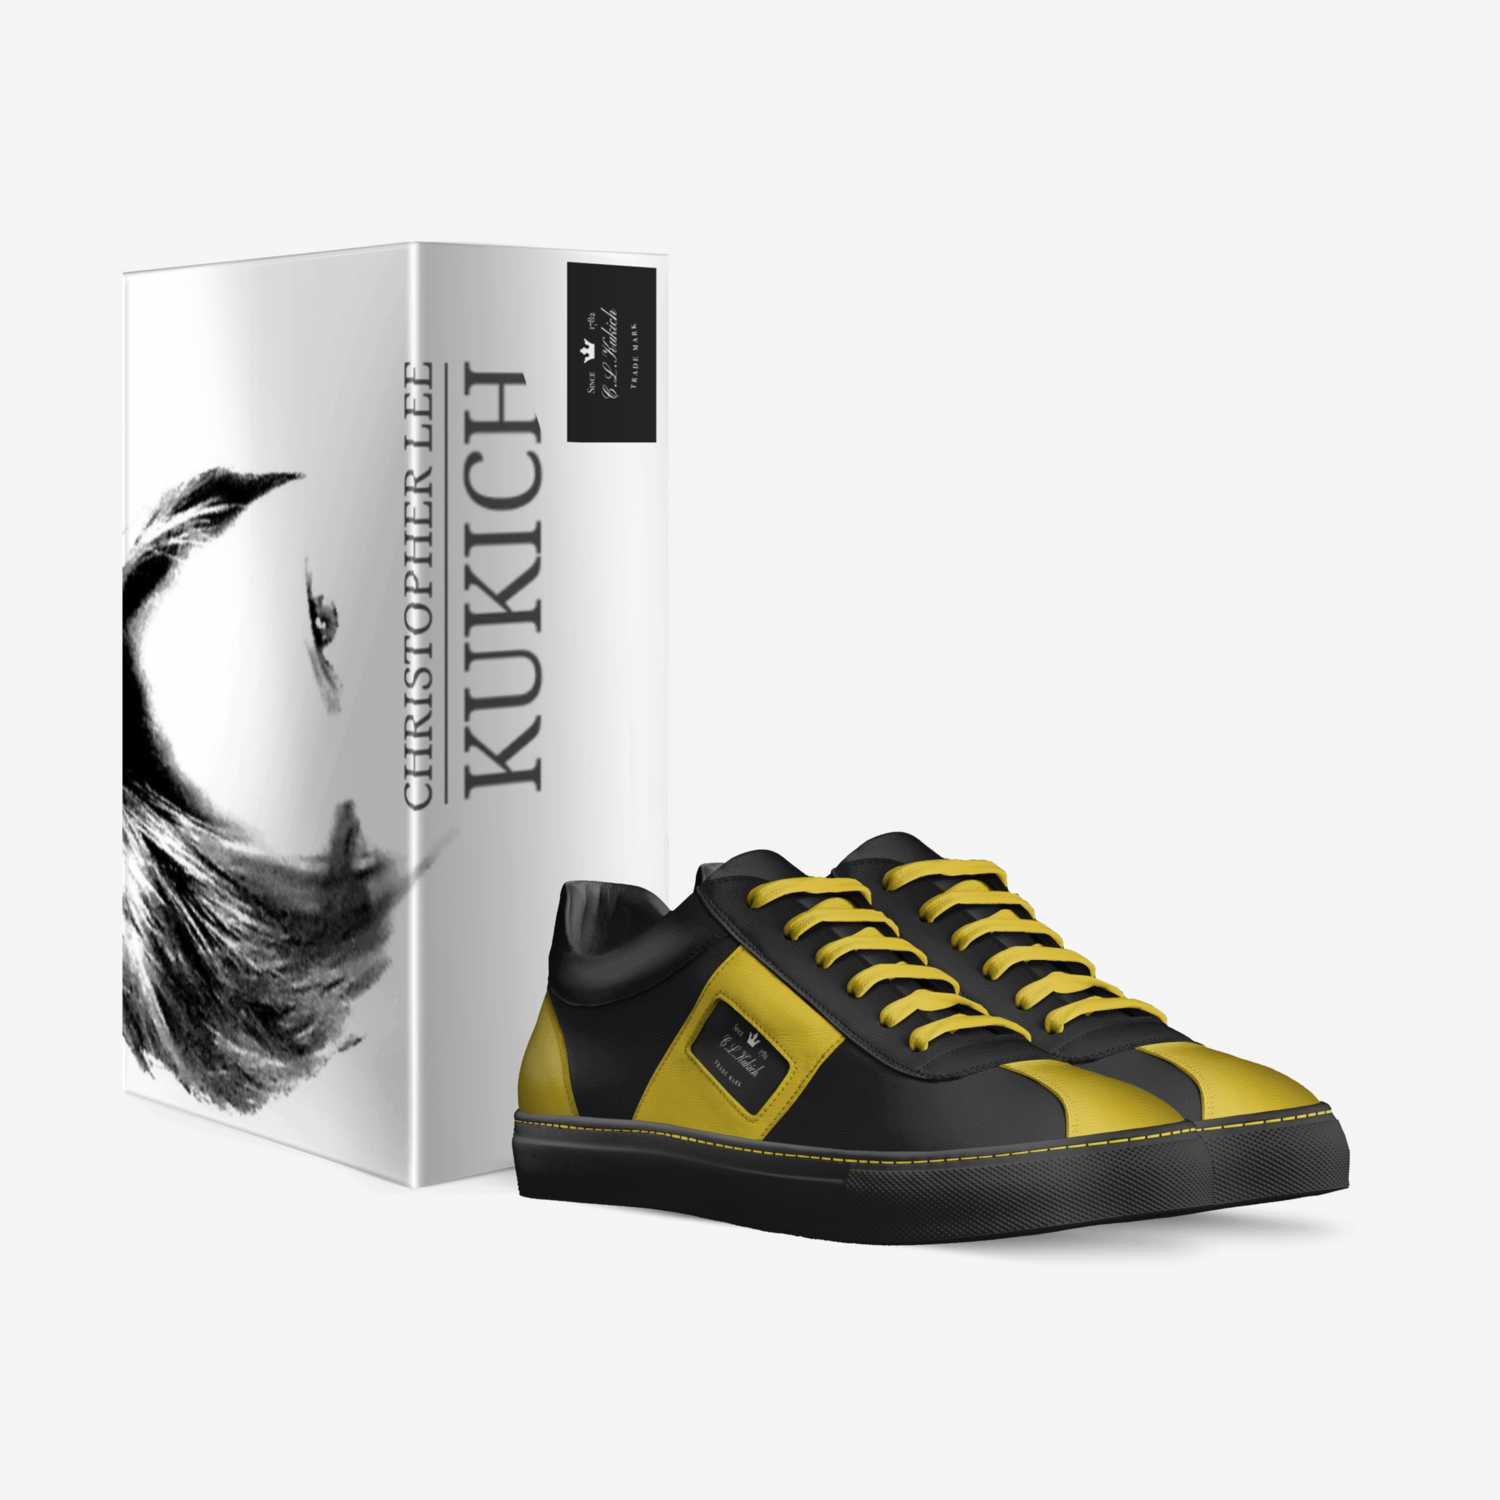 KuKich custom made in Italy shoes by Christopher Kukich | Box view